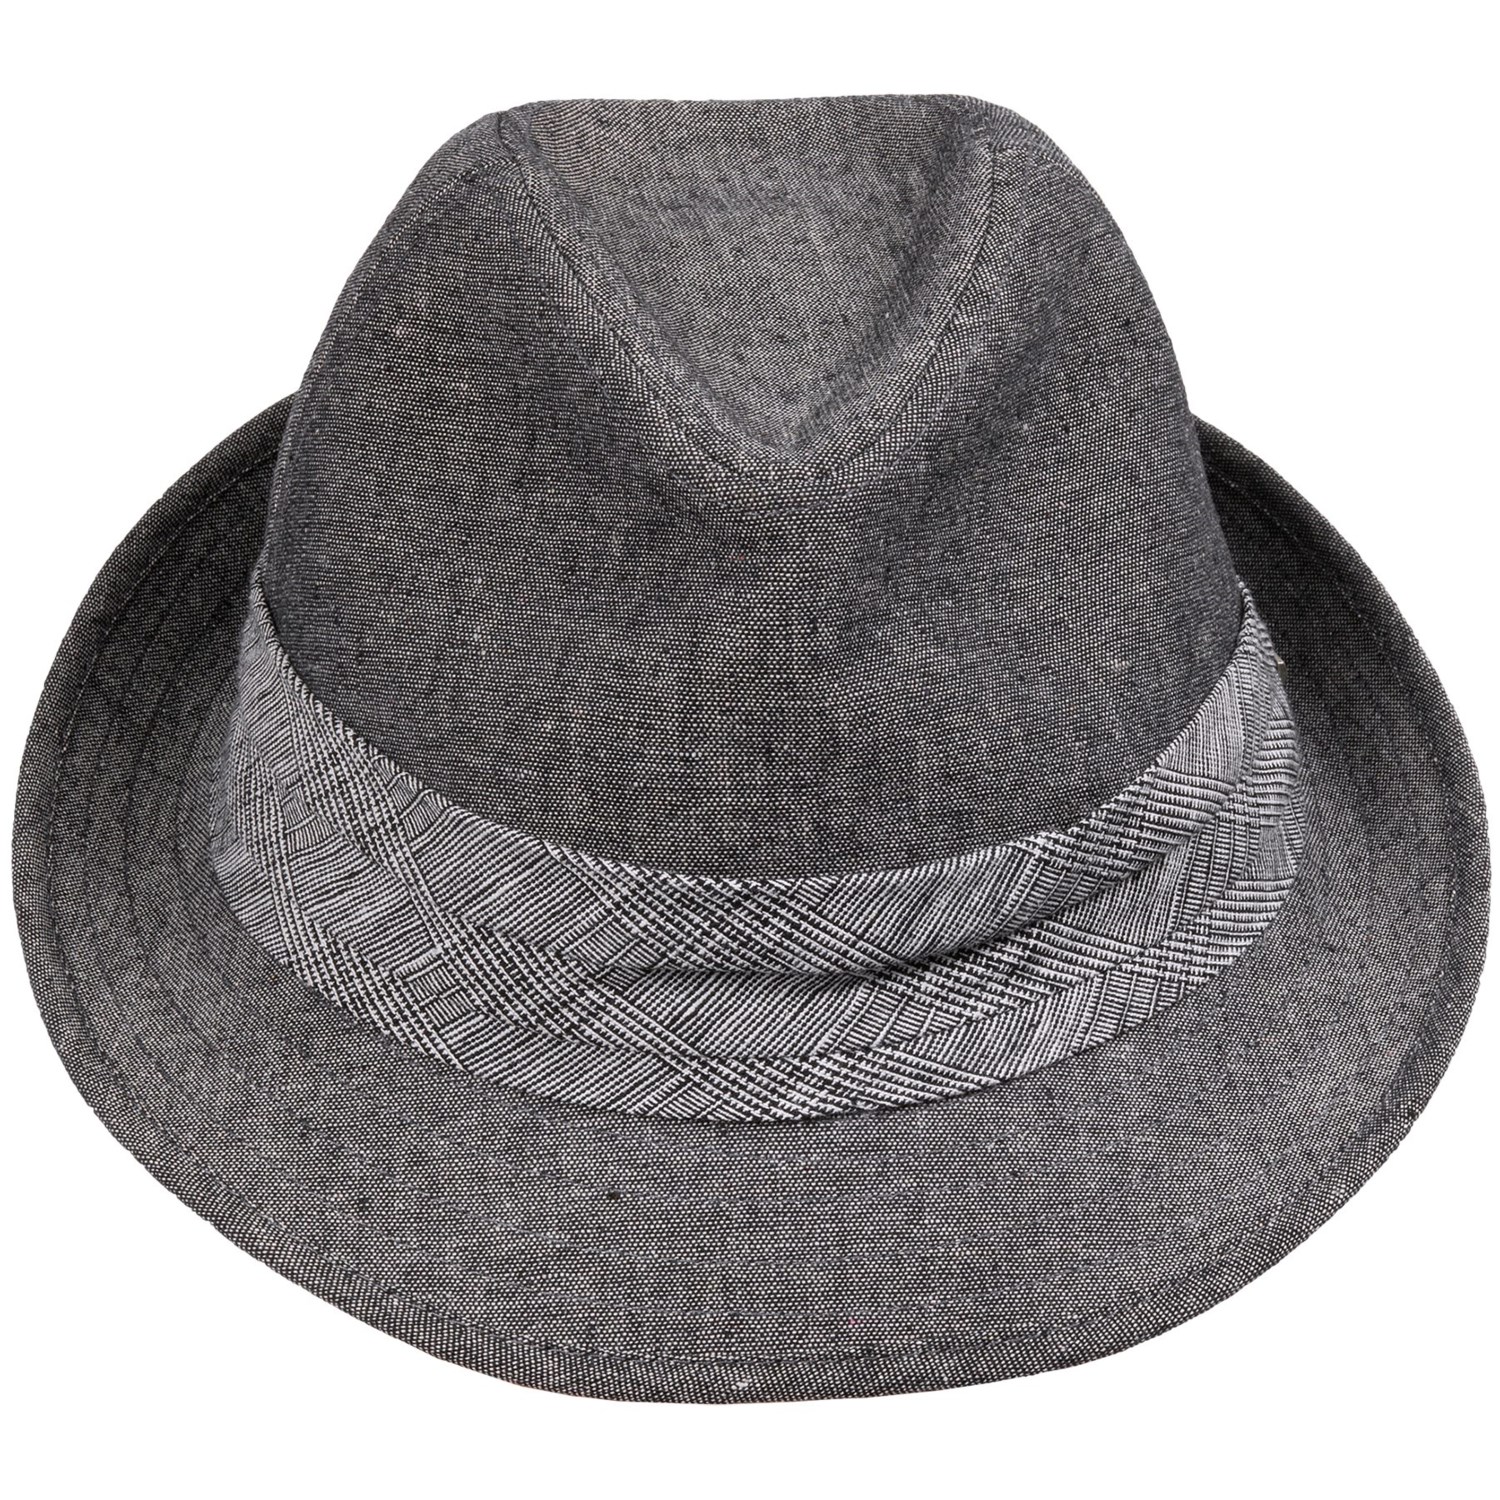 Stetson Woven Fedora Hat (For Men) 6638F - Save 84%